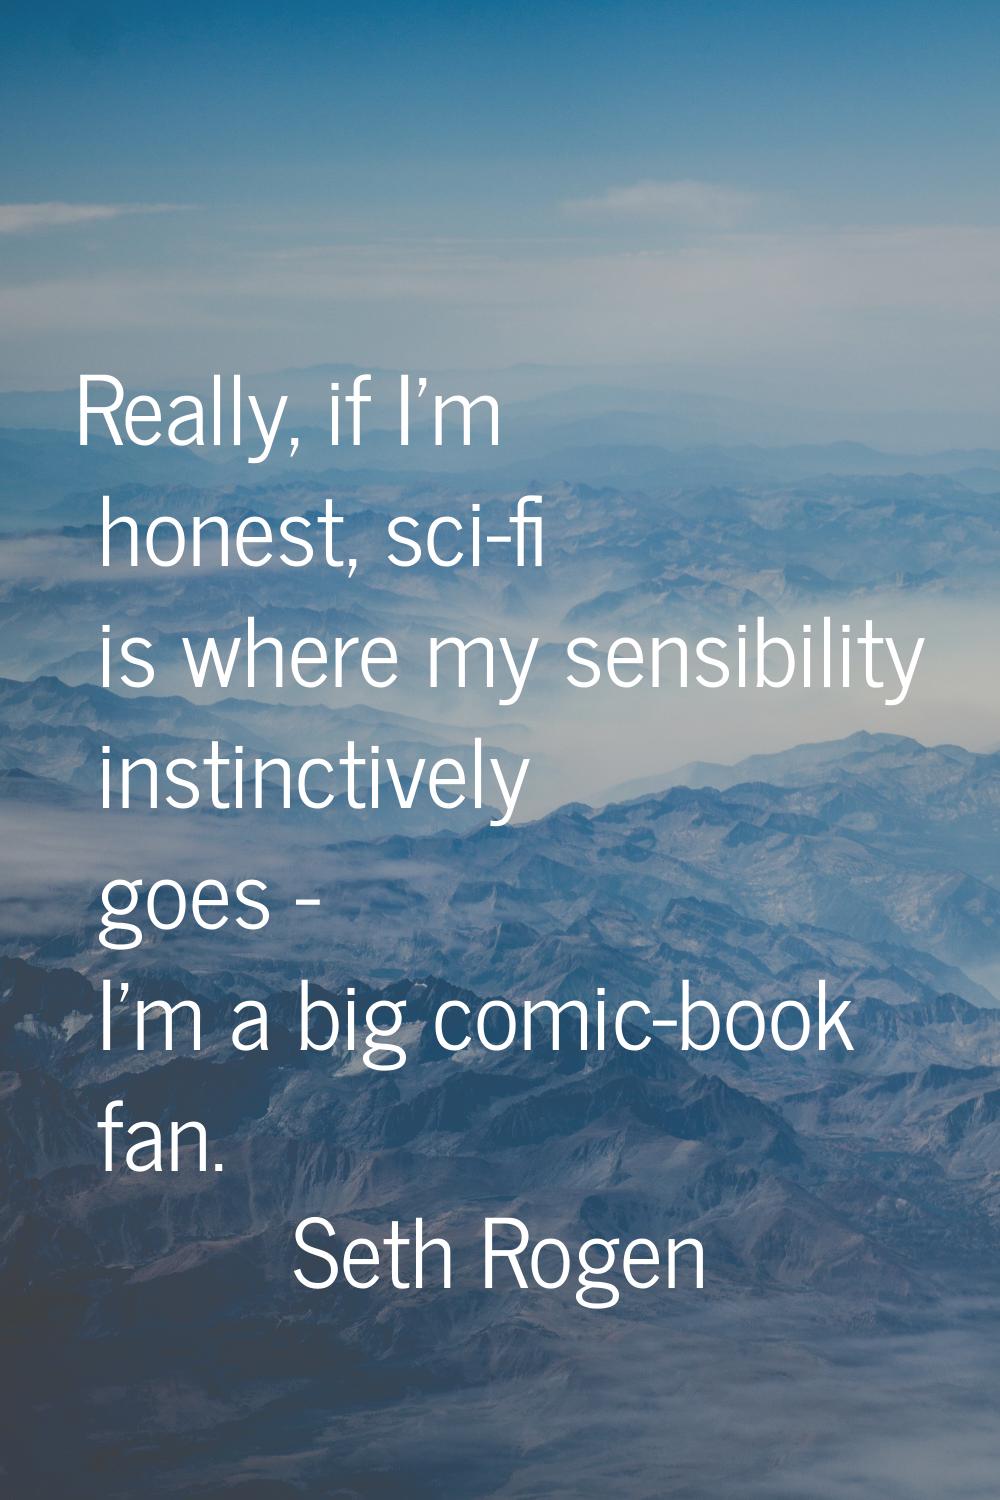 Really, if I'm honest, sci-fi is where my sensibility instinctively goes - I'm a big comic-book fan